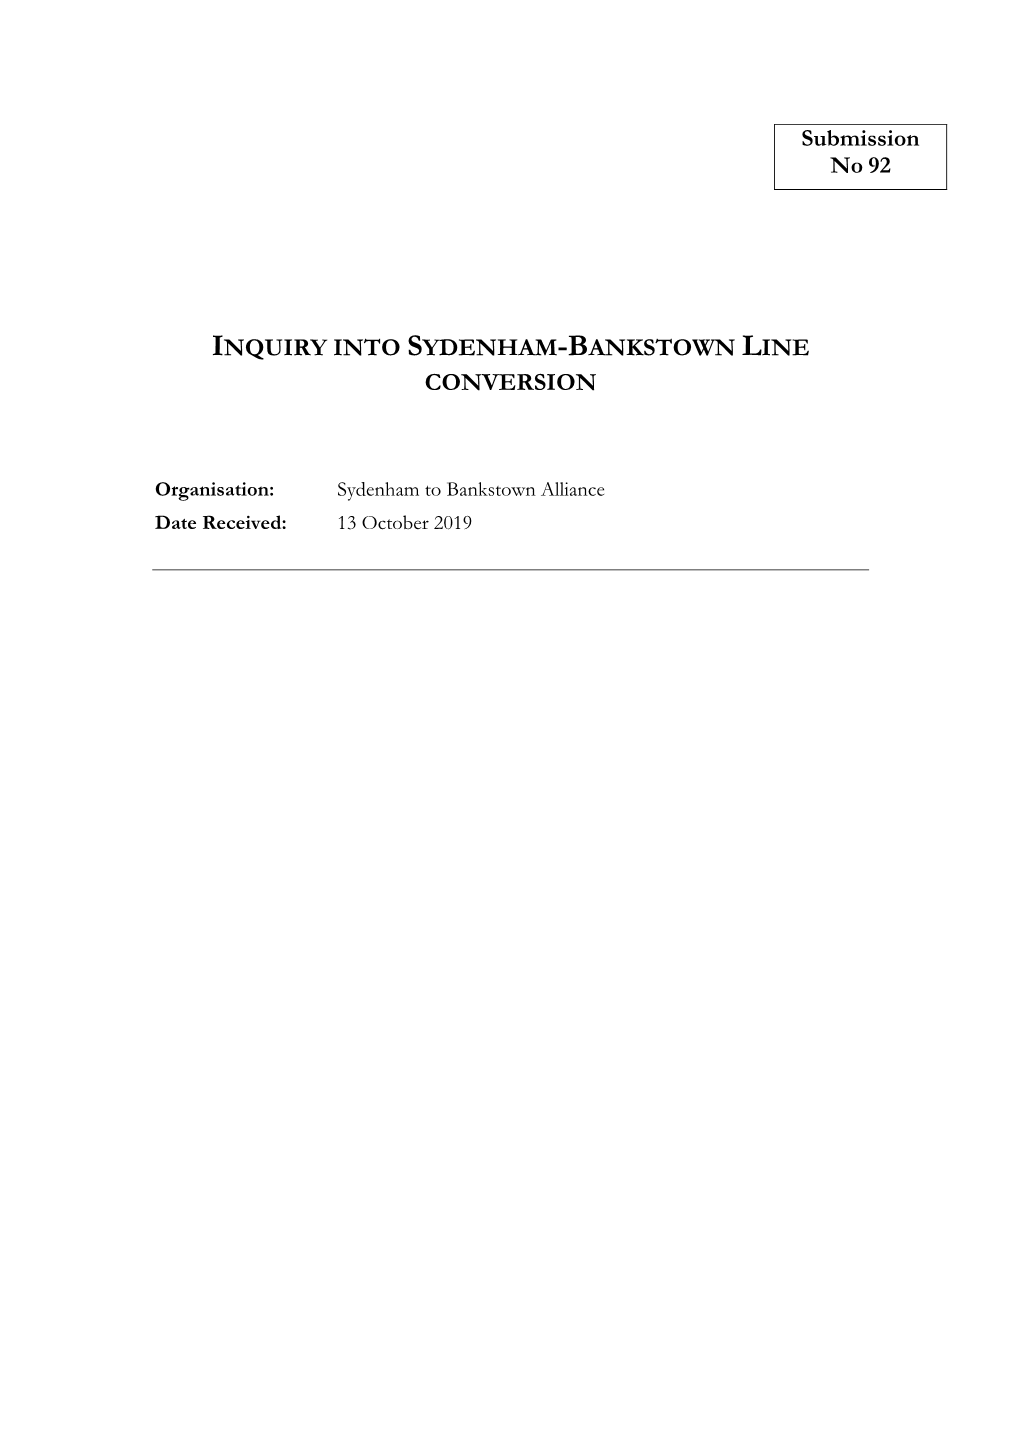 Submission No 92 INQUIRY INTO SYDENHAM-BANKSTOWN LINE